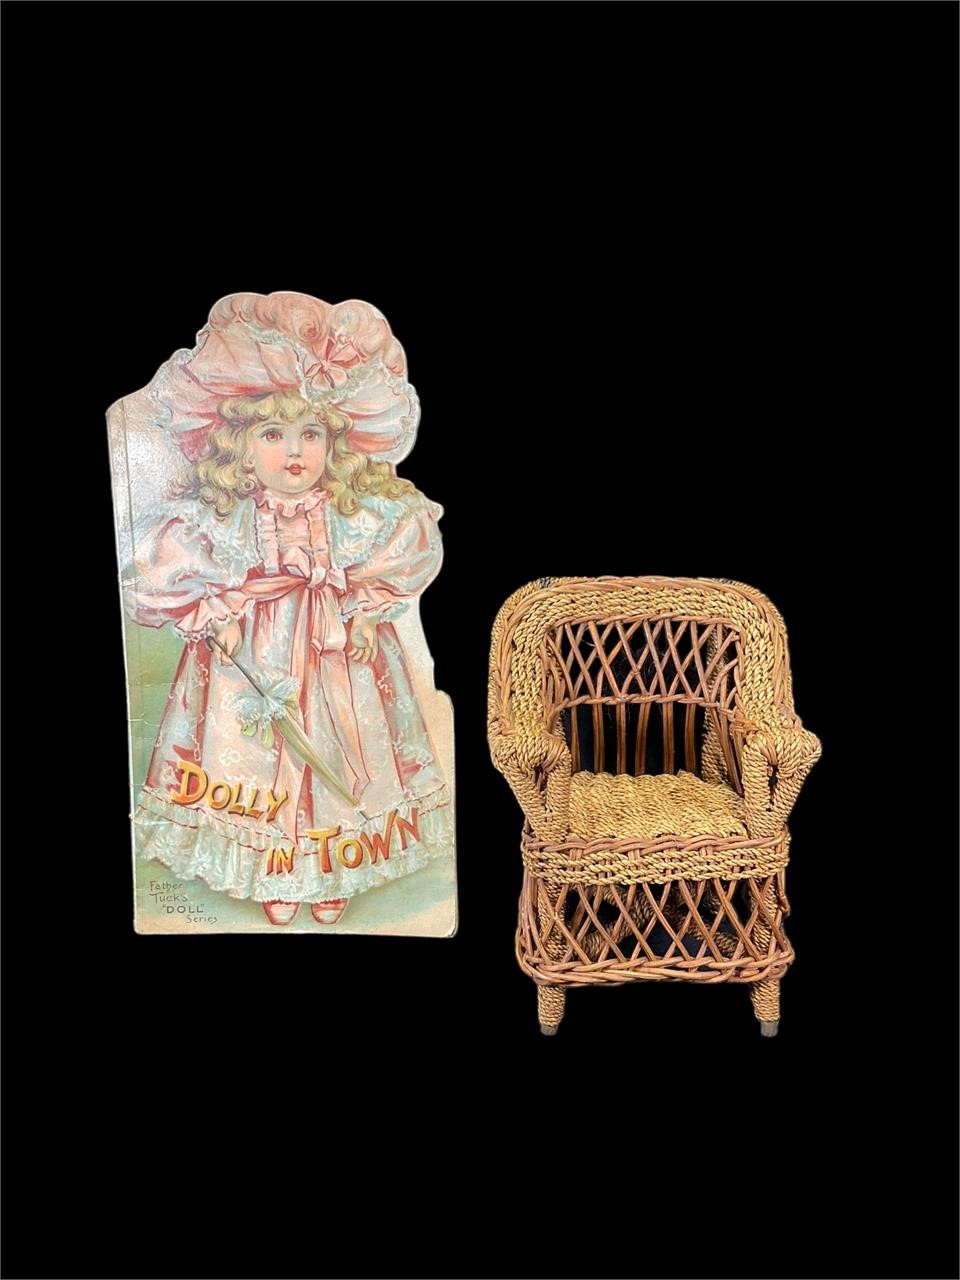 Antique Doll Book And Wicker Chair